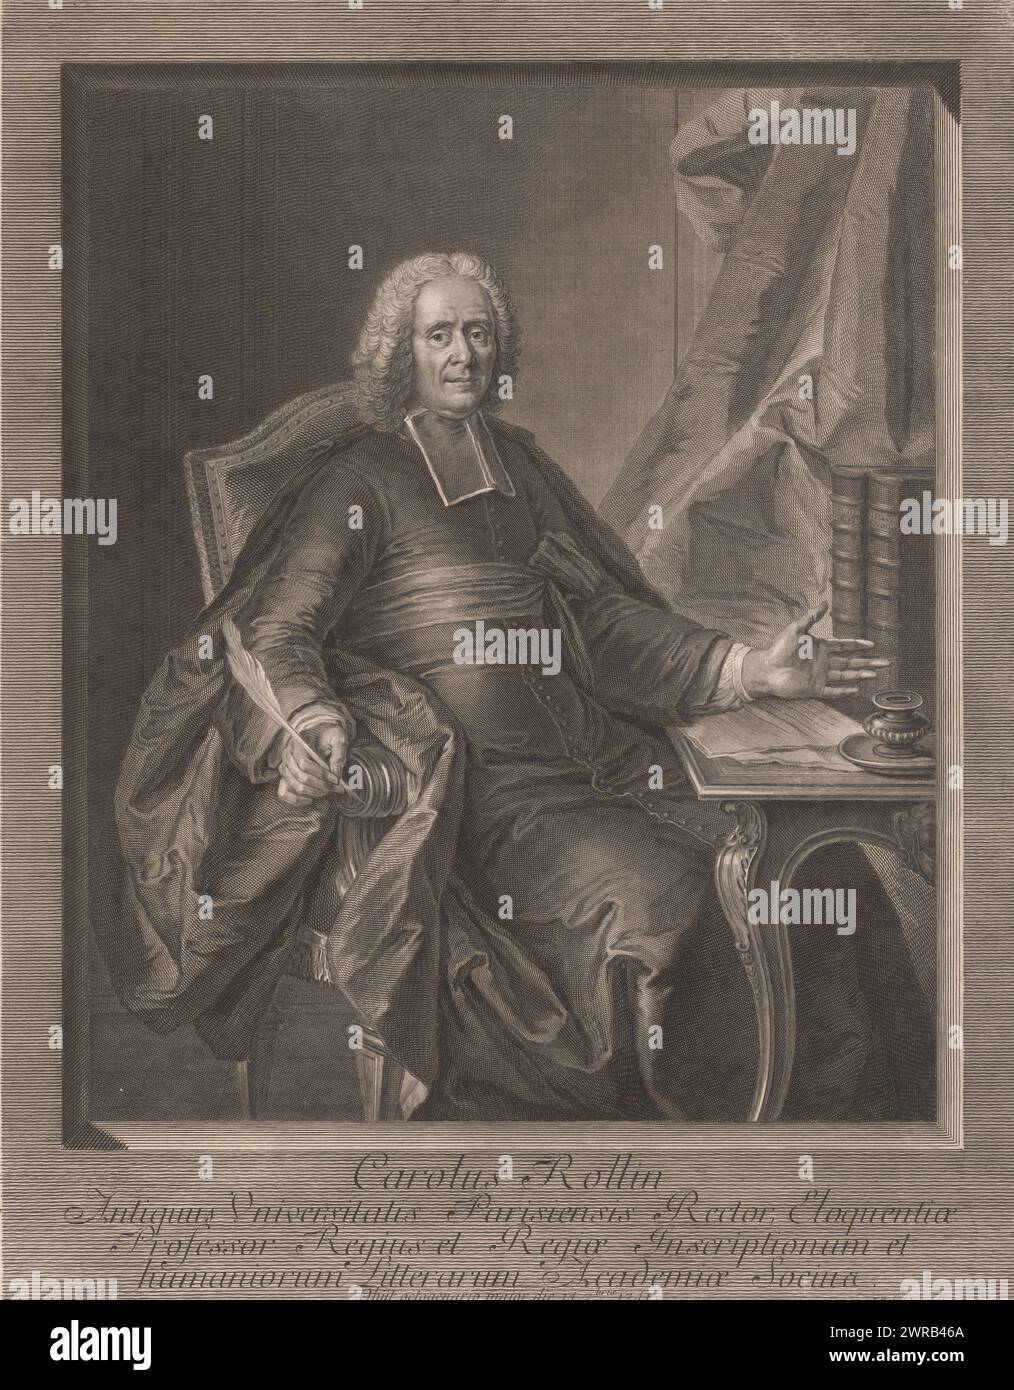 Portrait of Charles Rollin, Carolus Rollin (title on object), print maker: Jean Joseph Baléchou, after painting by: Charles-Antoine Coypel, publisher: Louis-Charles Desnos, print maker: France, publisher: Paris, 1763, paper, engraving, height 514 mm × width 397 mm, print Stock Photo